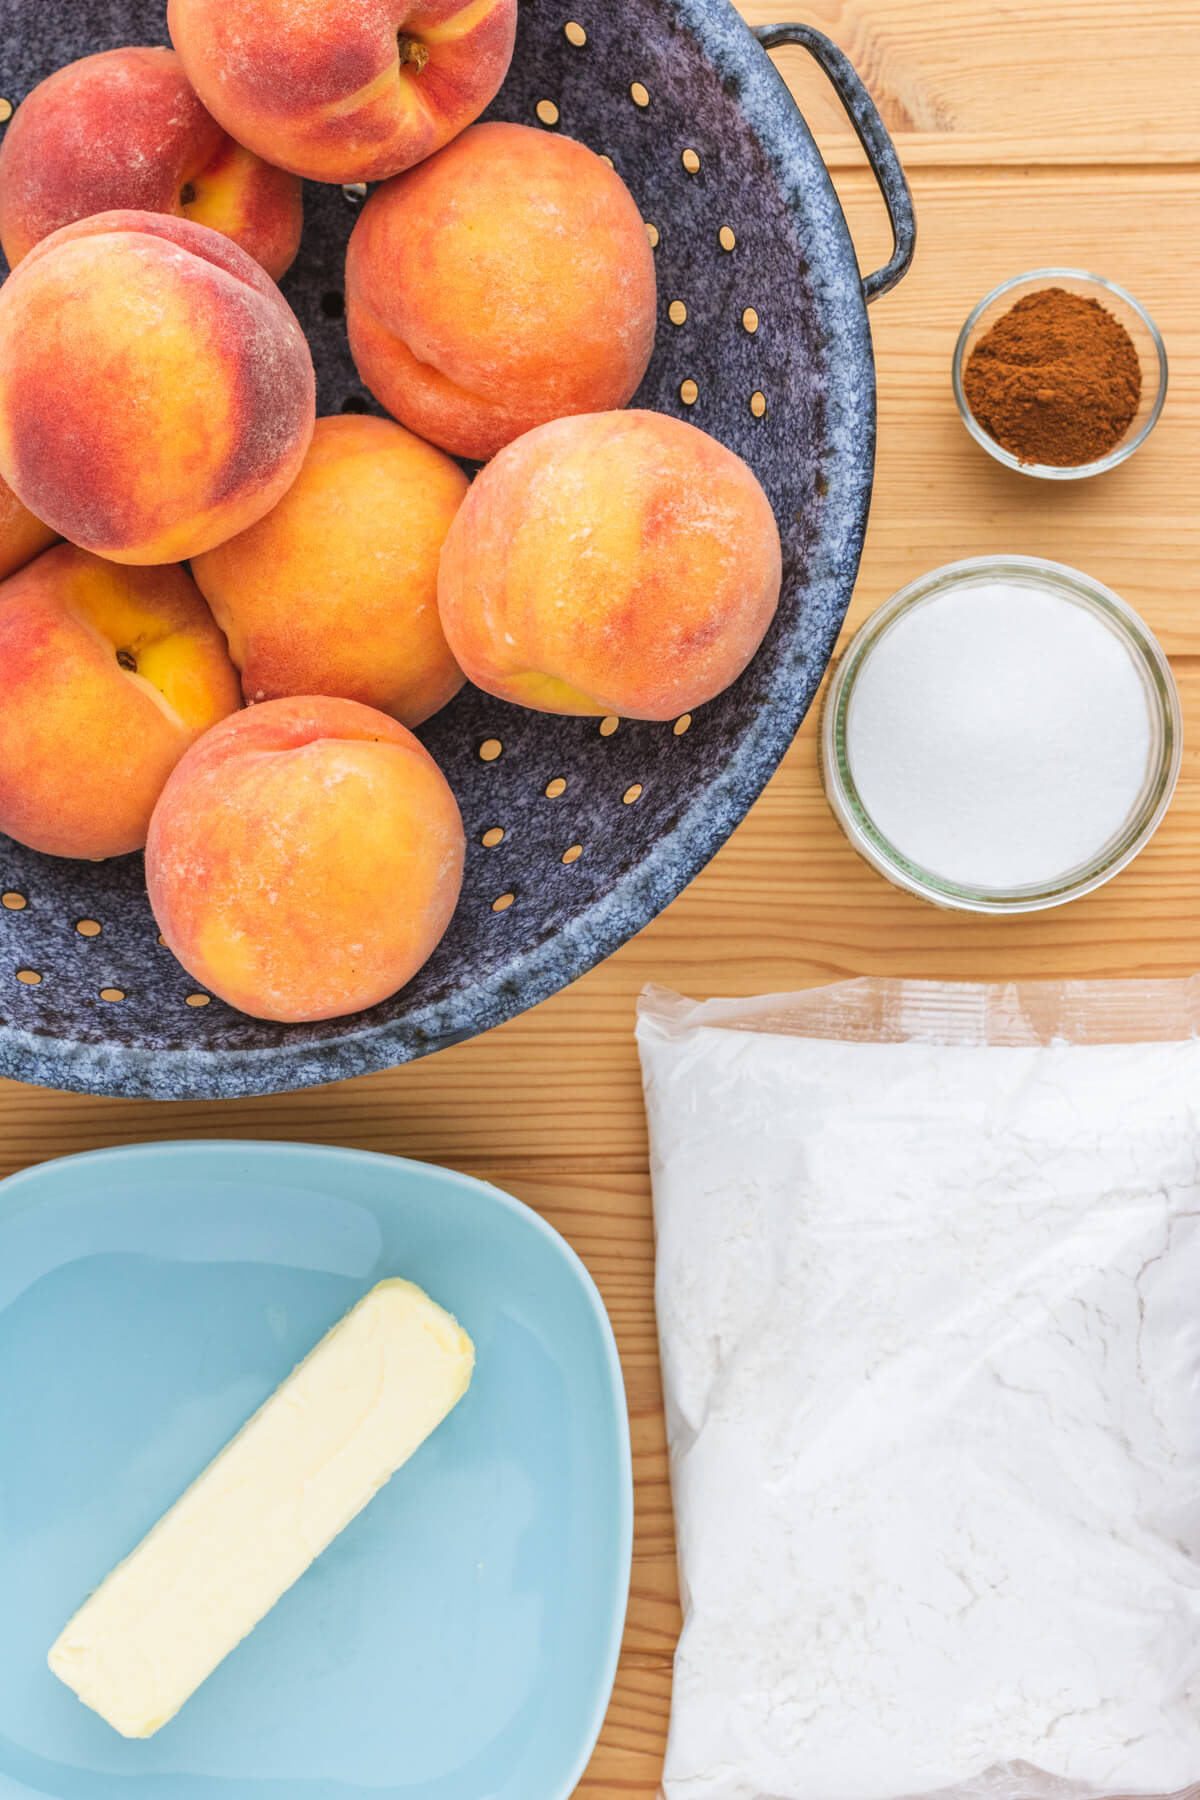 Ingredients required to make a Peach Cobbler Dump Cake using fresh peaches.